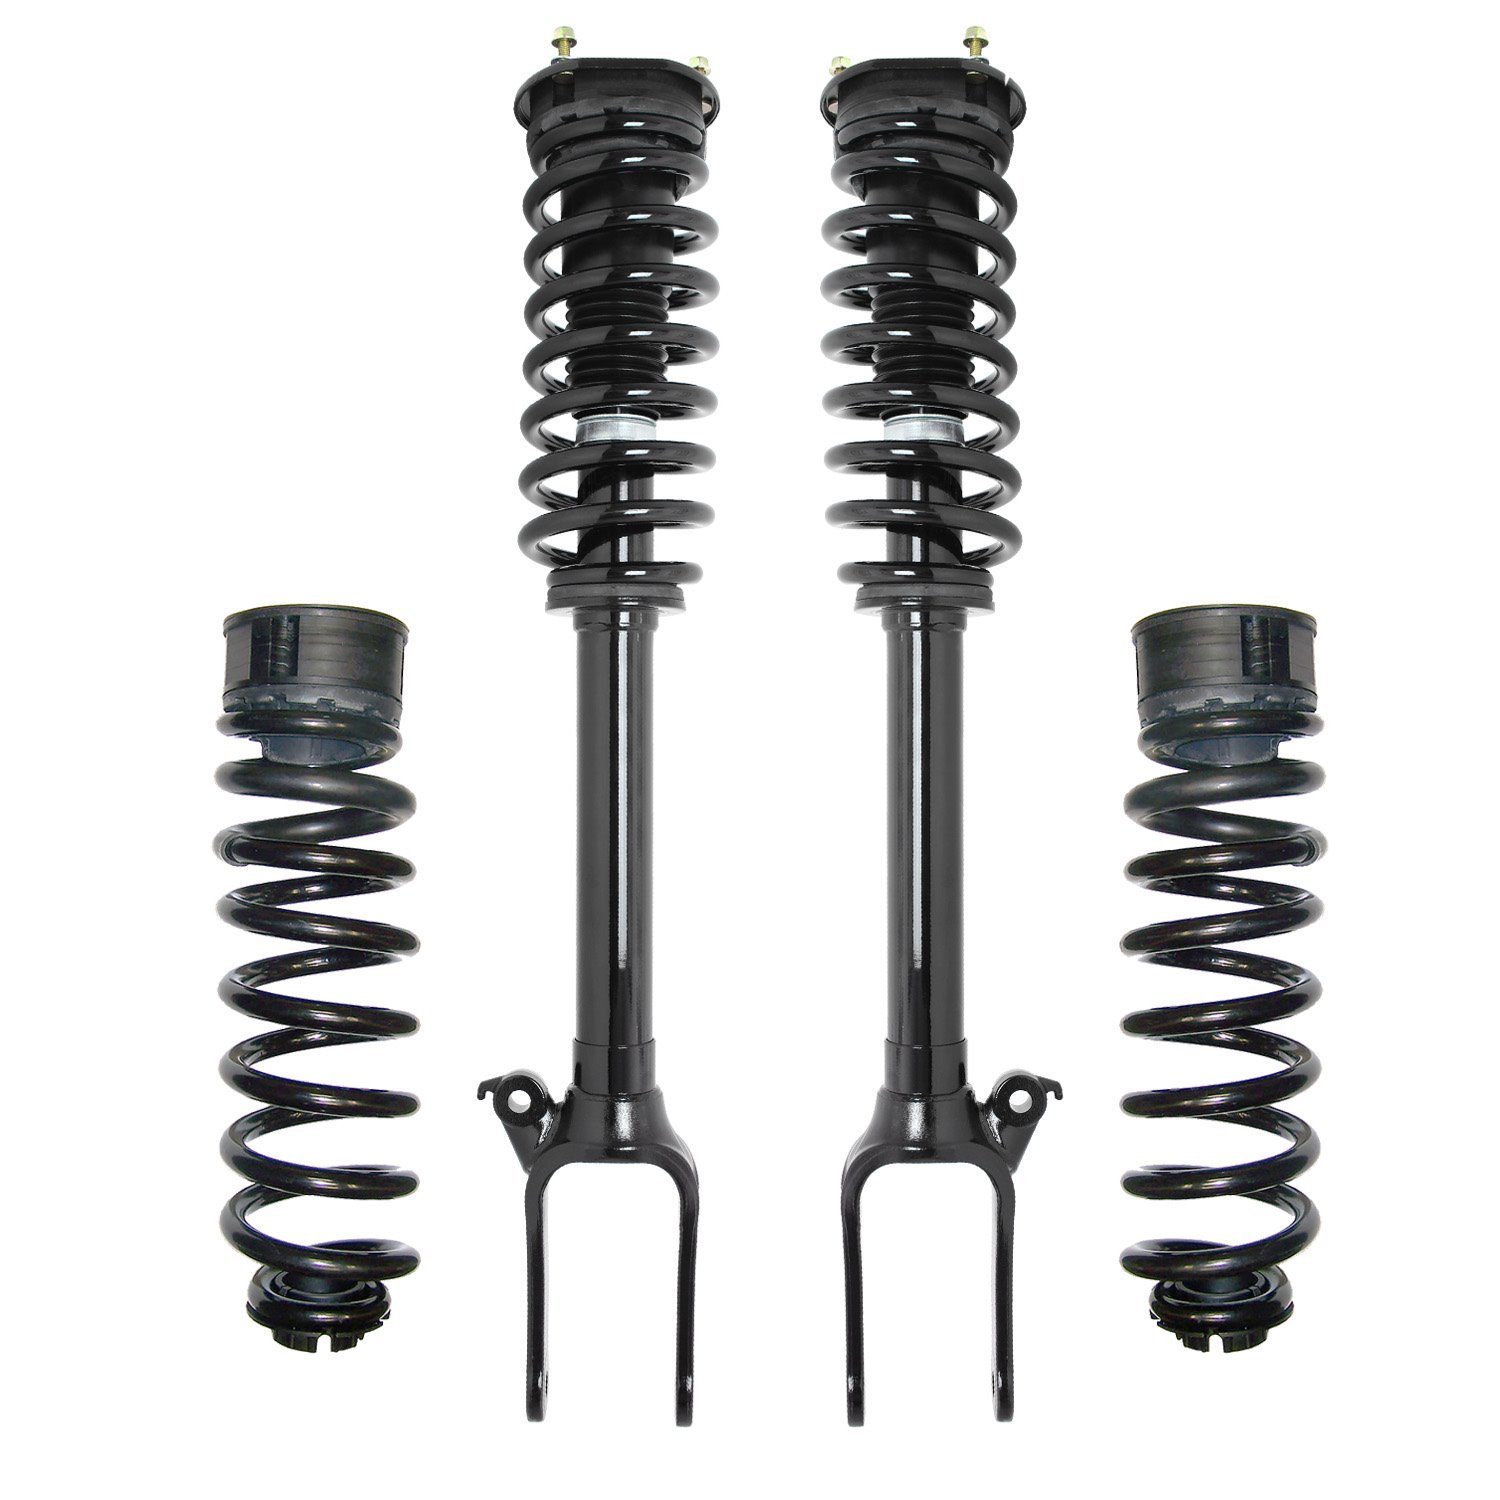 4-61300c-30-512900 Air Spring To Coil Spring Conversion Kit Fits Select Mercedes-Benz